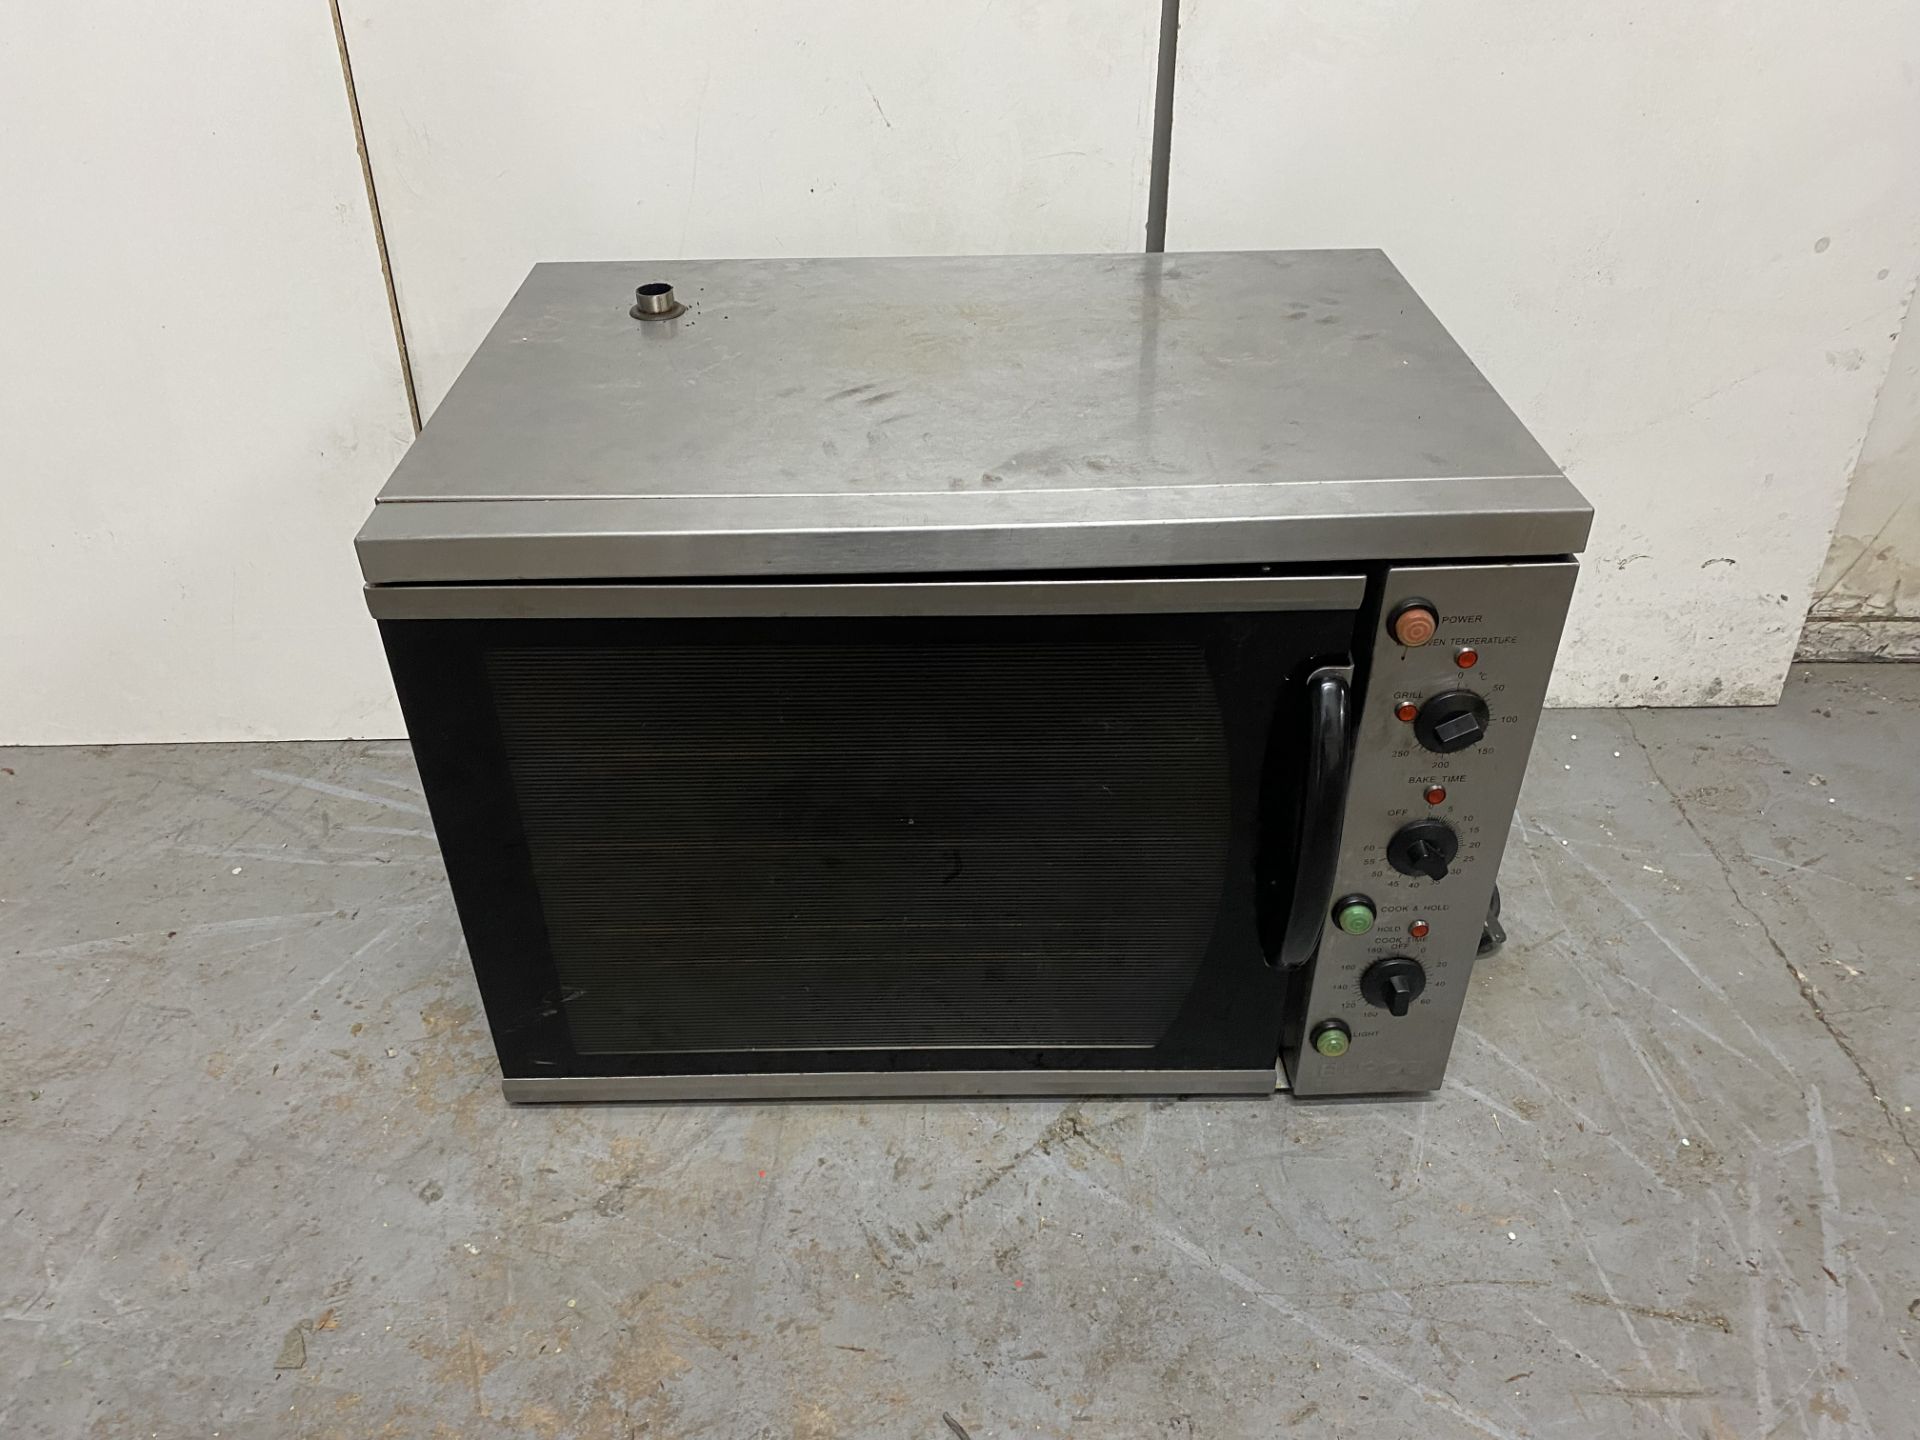 Burco CTCO01 Large Commercial Convection Oven - Image 2 of 8